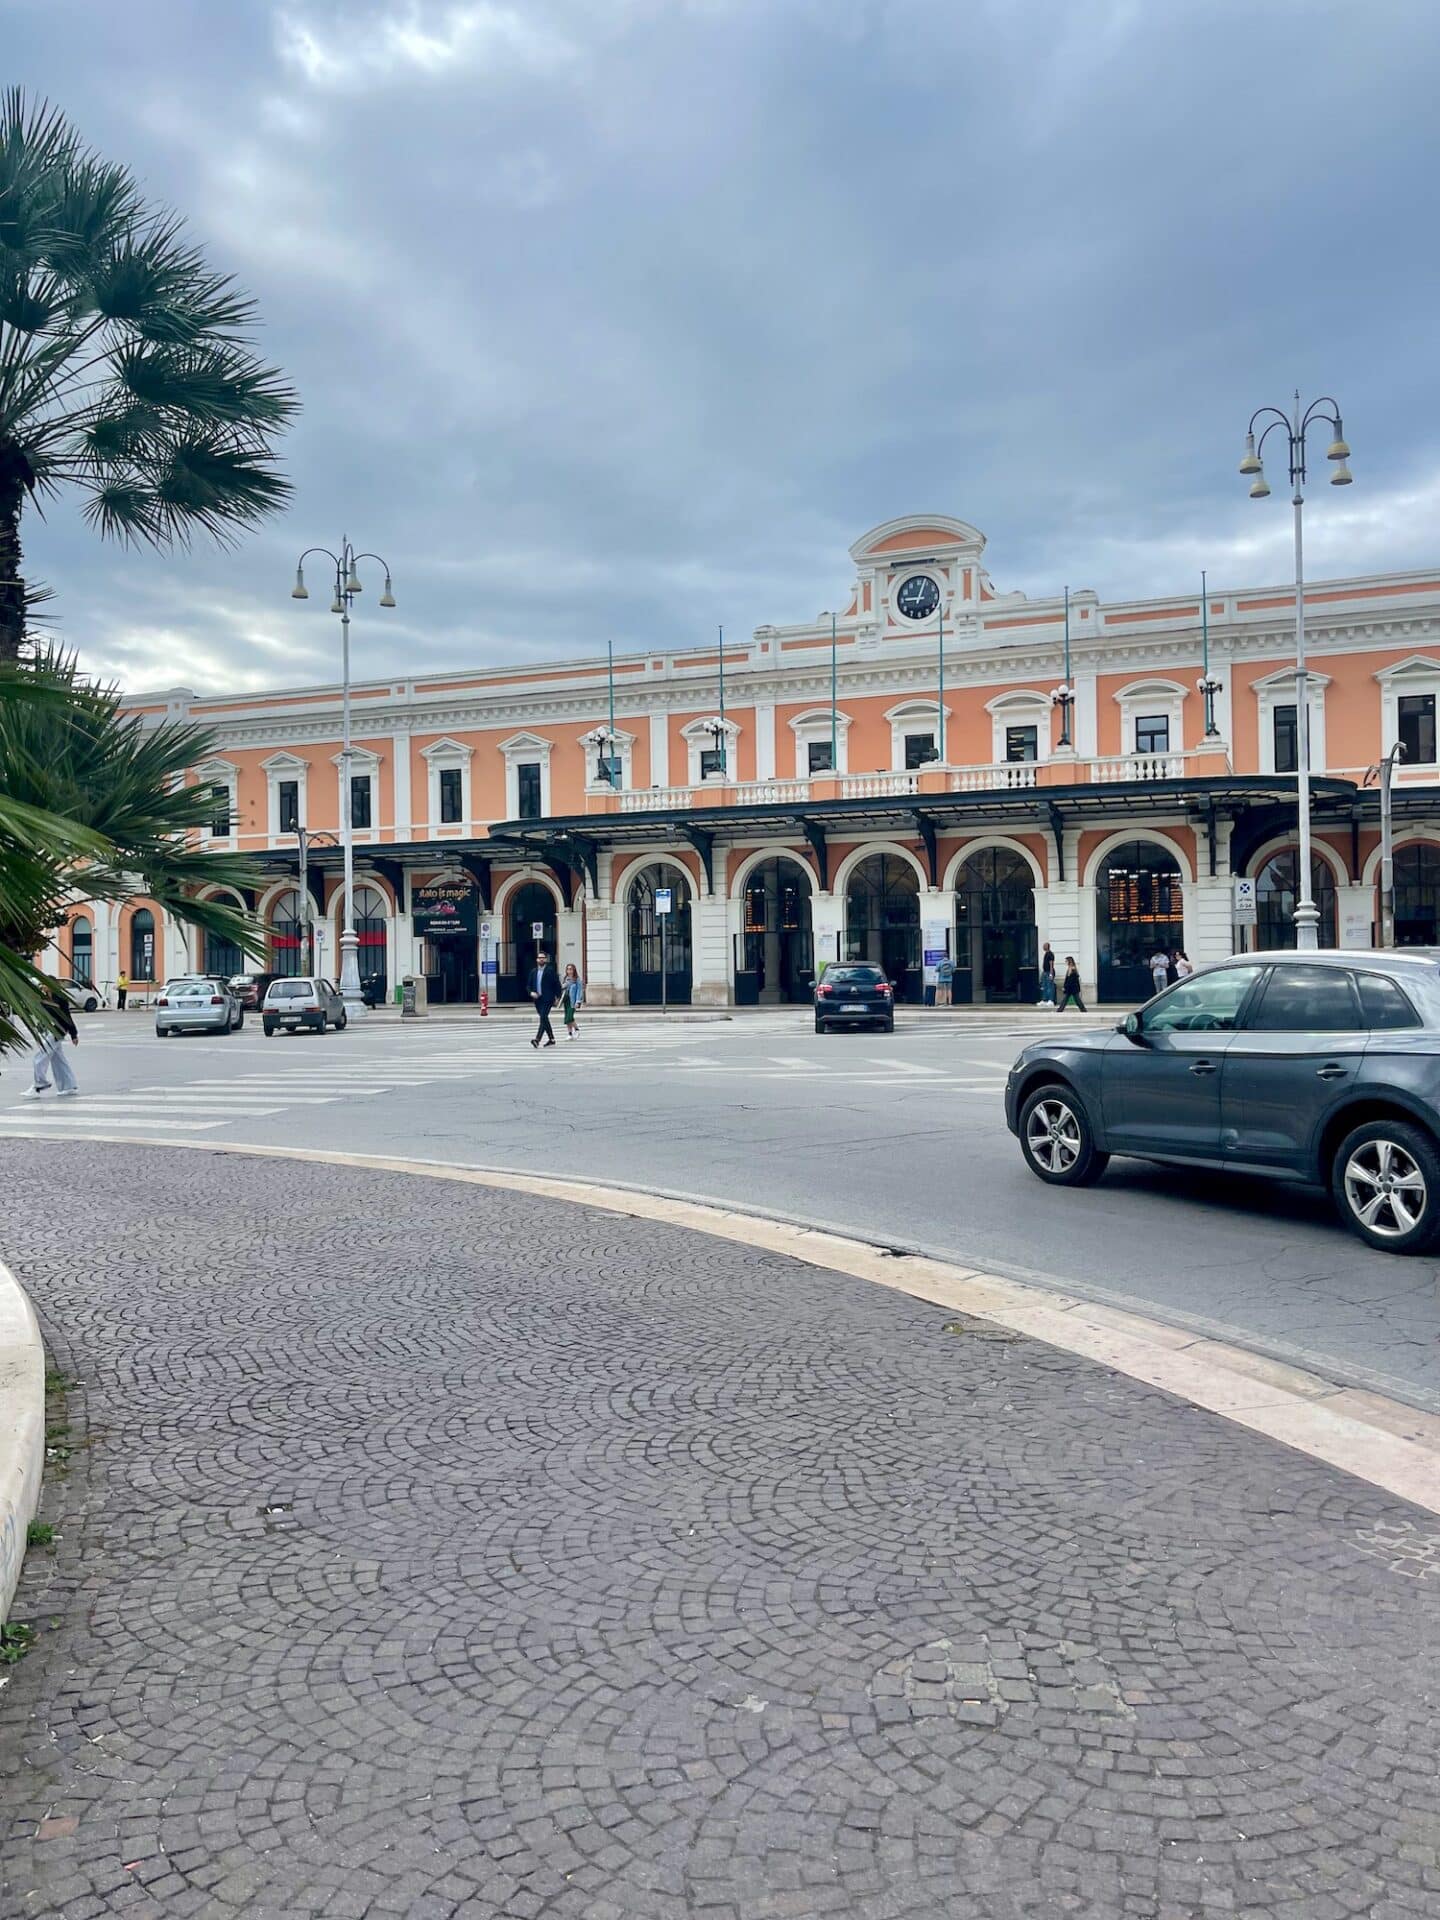 A view of the Bari train station, featuring a large, peach-colored building with white trim and a clock on the top. The station has a grand, historic look with arched entrances and street lamps in front. Cars and pedestrians are visible in the foreground.